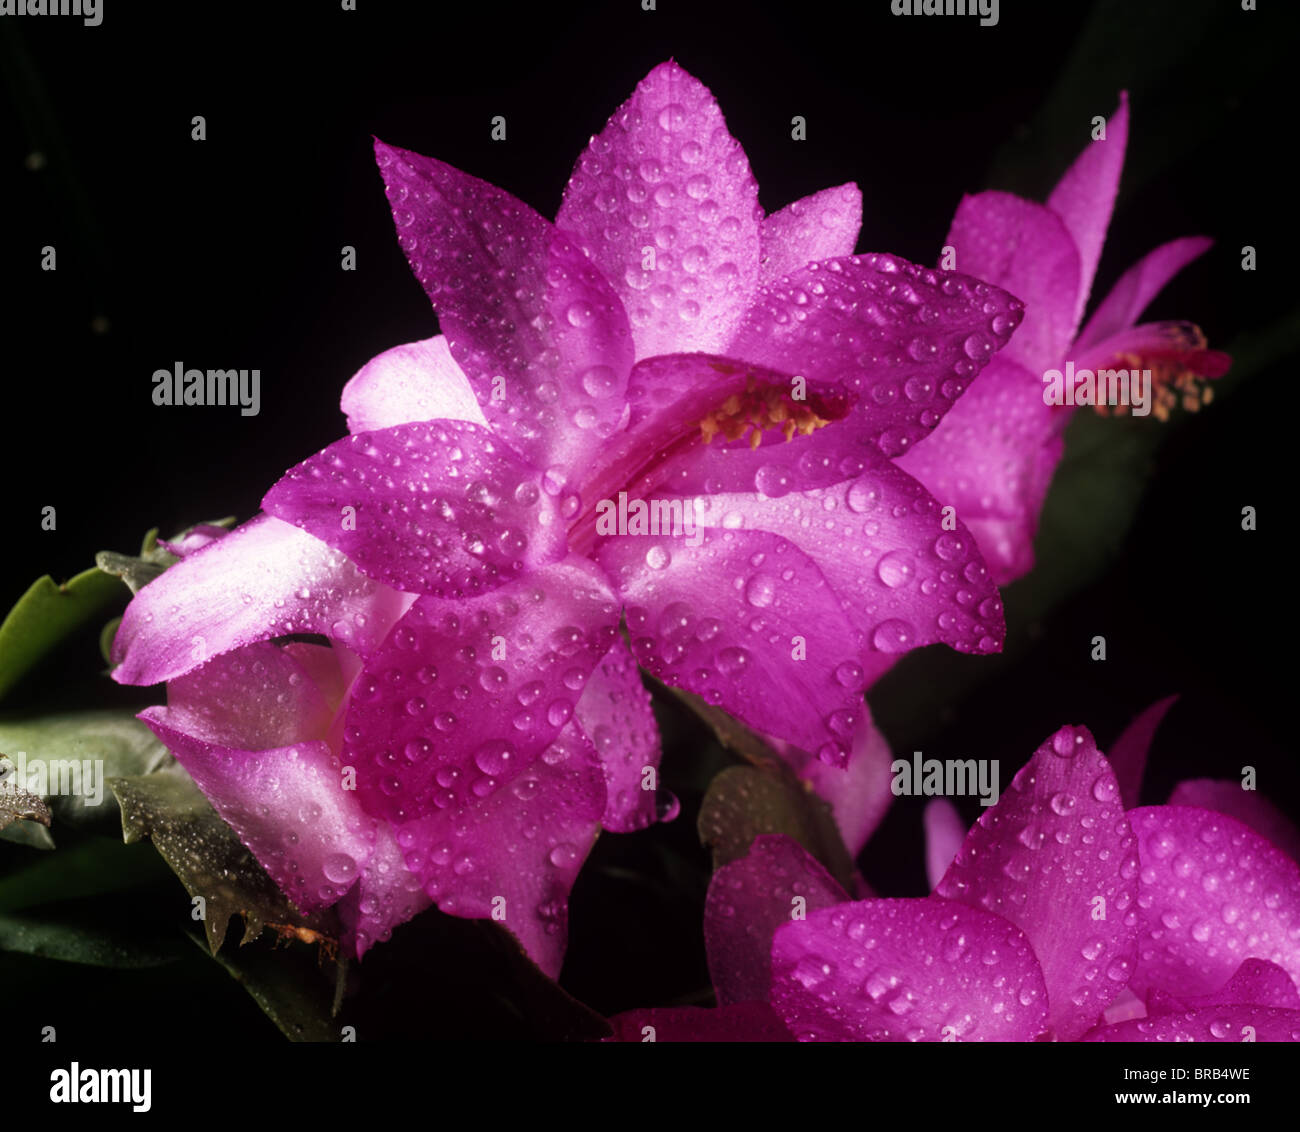 Flowering Christmas cactus (Schlumbergera truncata) with water drops and backlit Stock Photo